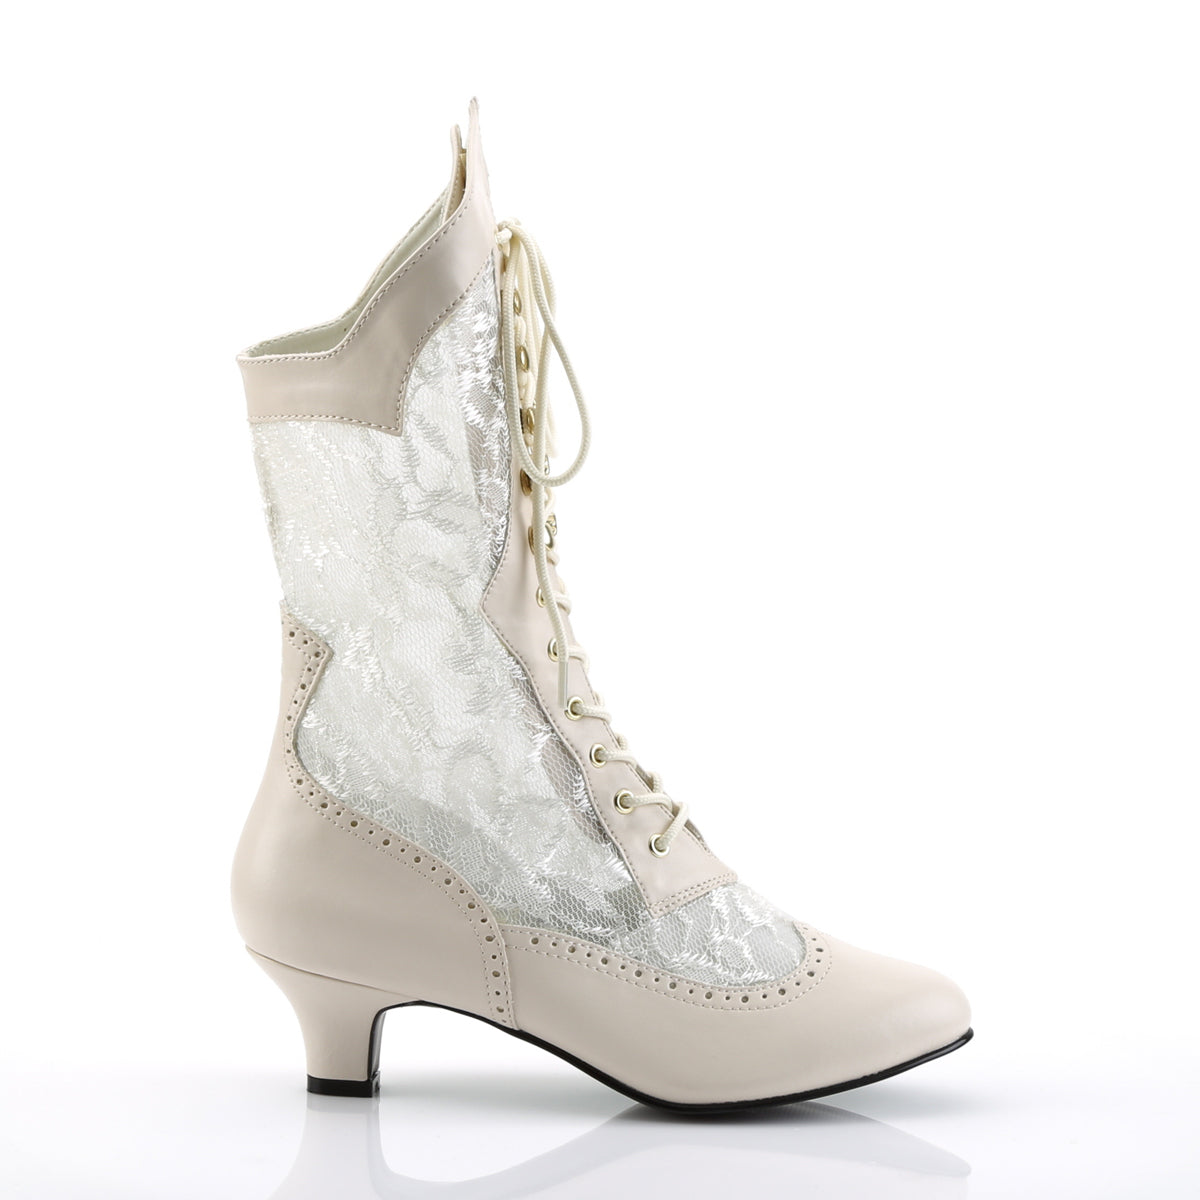 DAME-115 Black Ankle Boots White Multi view 2